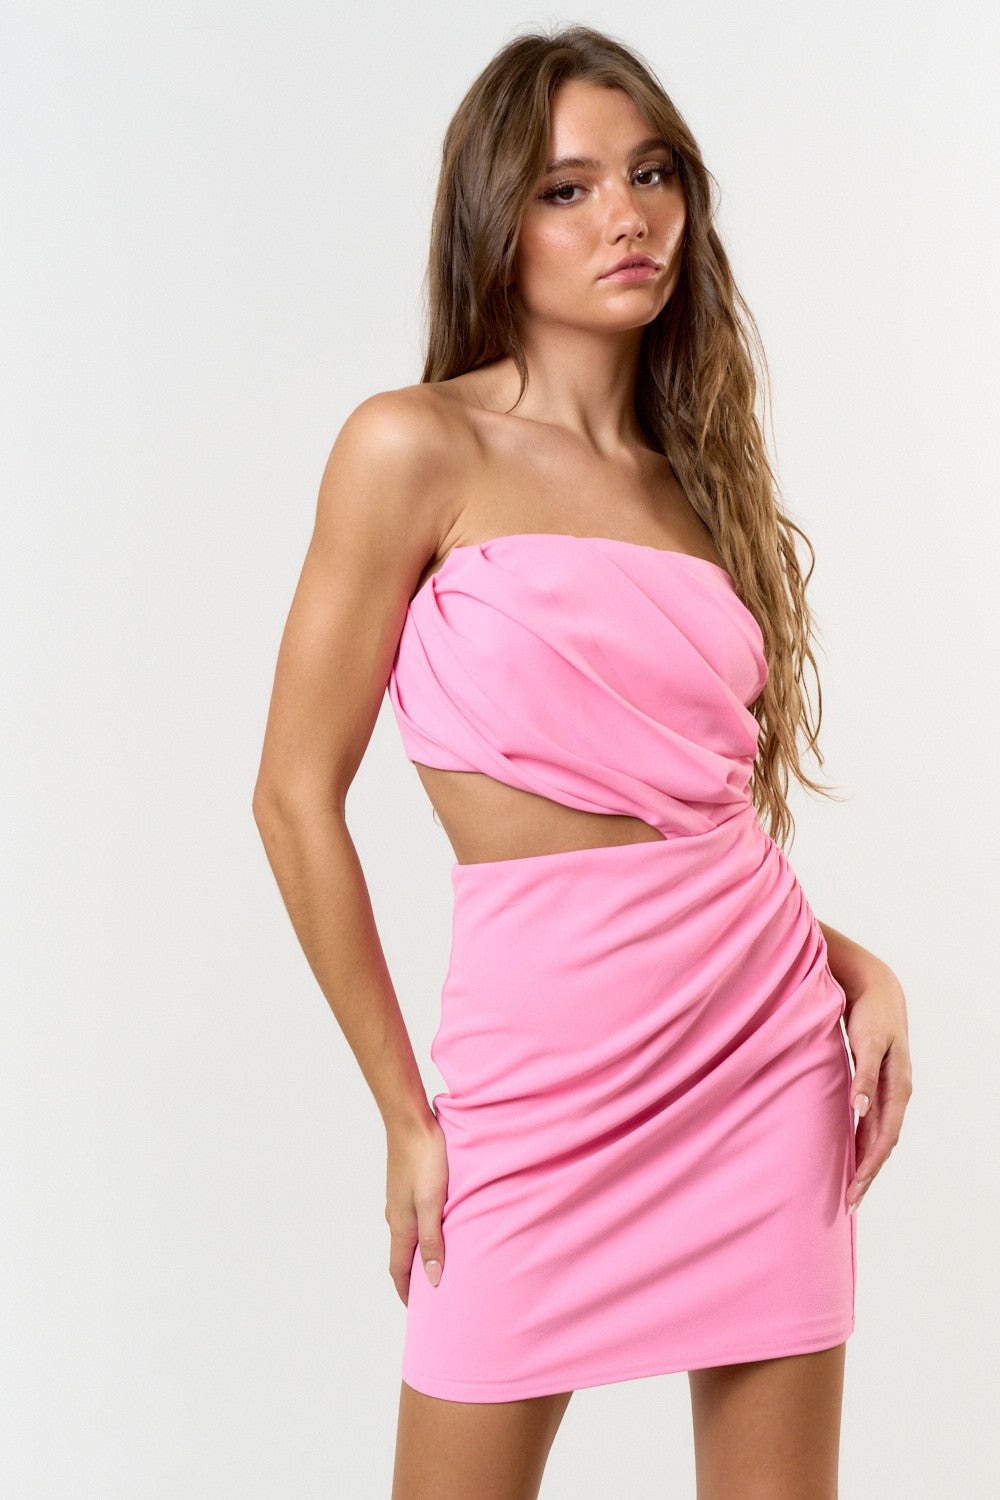 Fashion Strapless Light Pink Pleated Cut-Out Bodycon Mini Dress